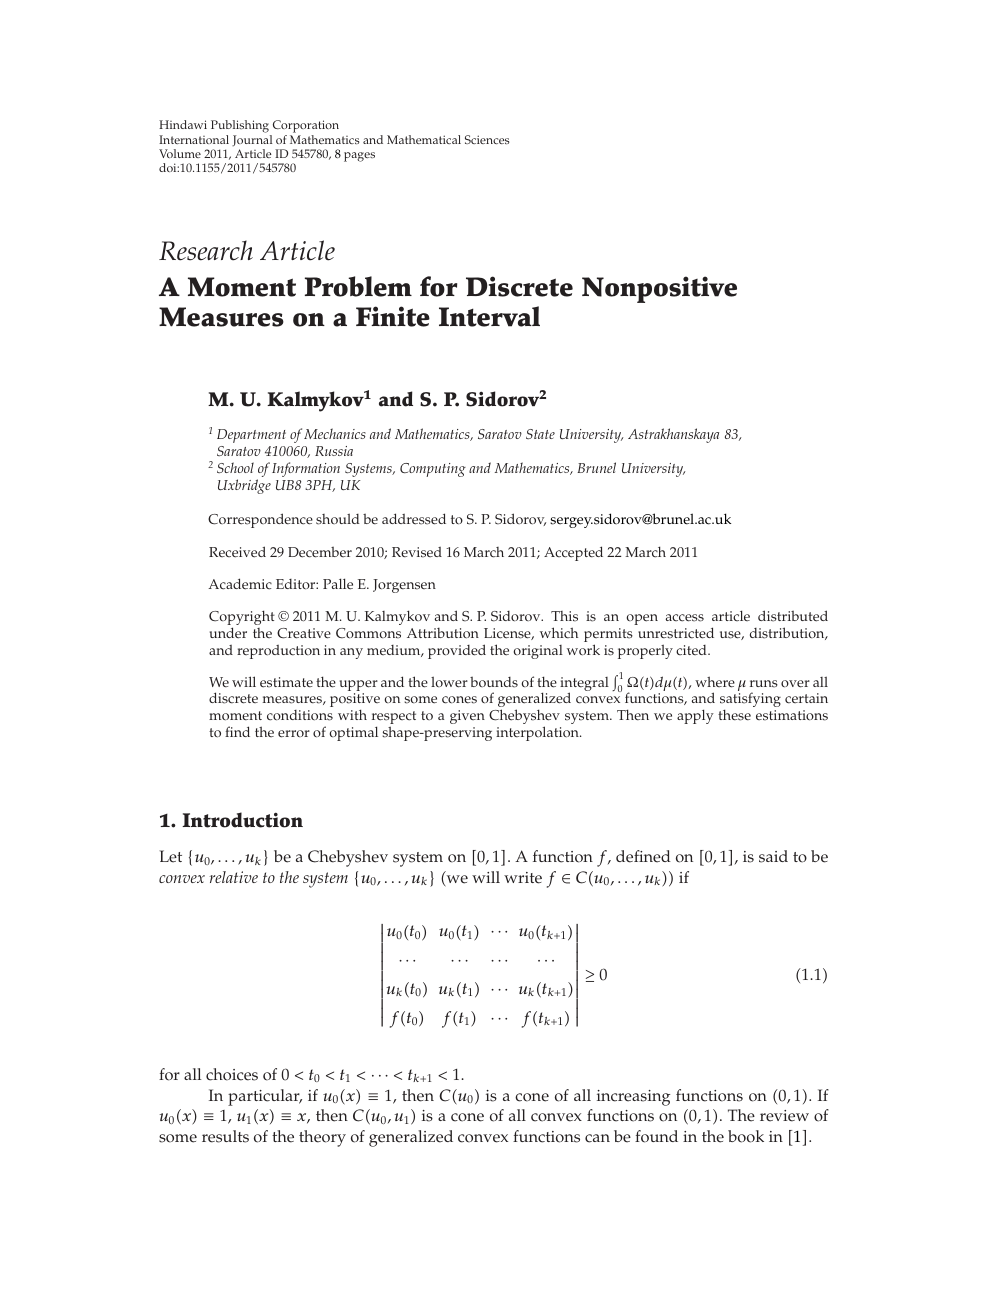 A Moment Problem For Discrete Nonpositive Measures On A Finite Interval Topic Of Research Paper In Mathematics Download Scholarly Article Pdf And Read For Free On Cyberleninka Open Science Hub